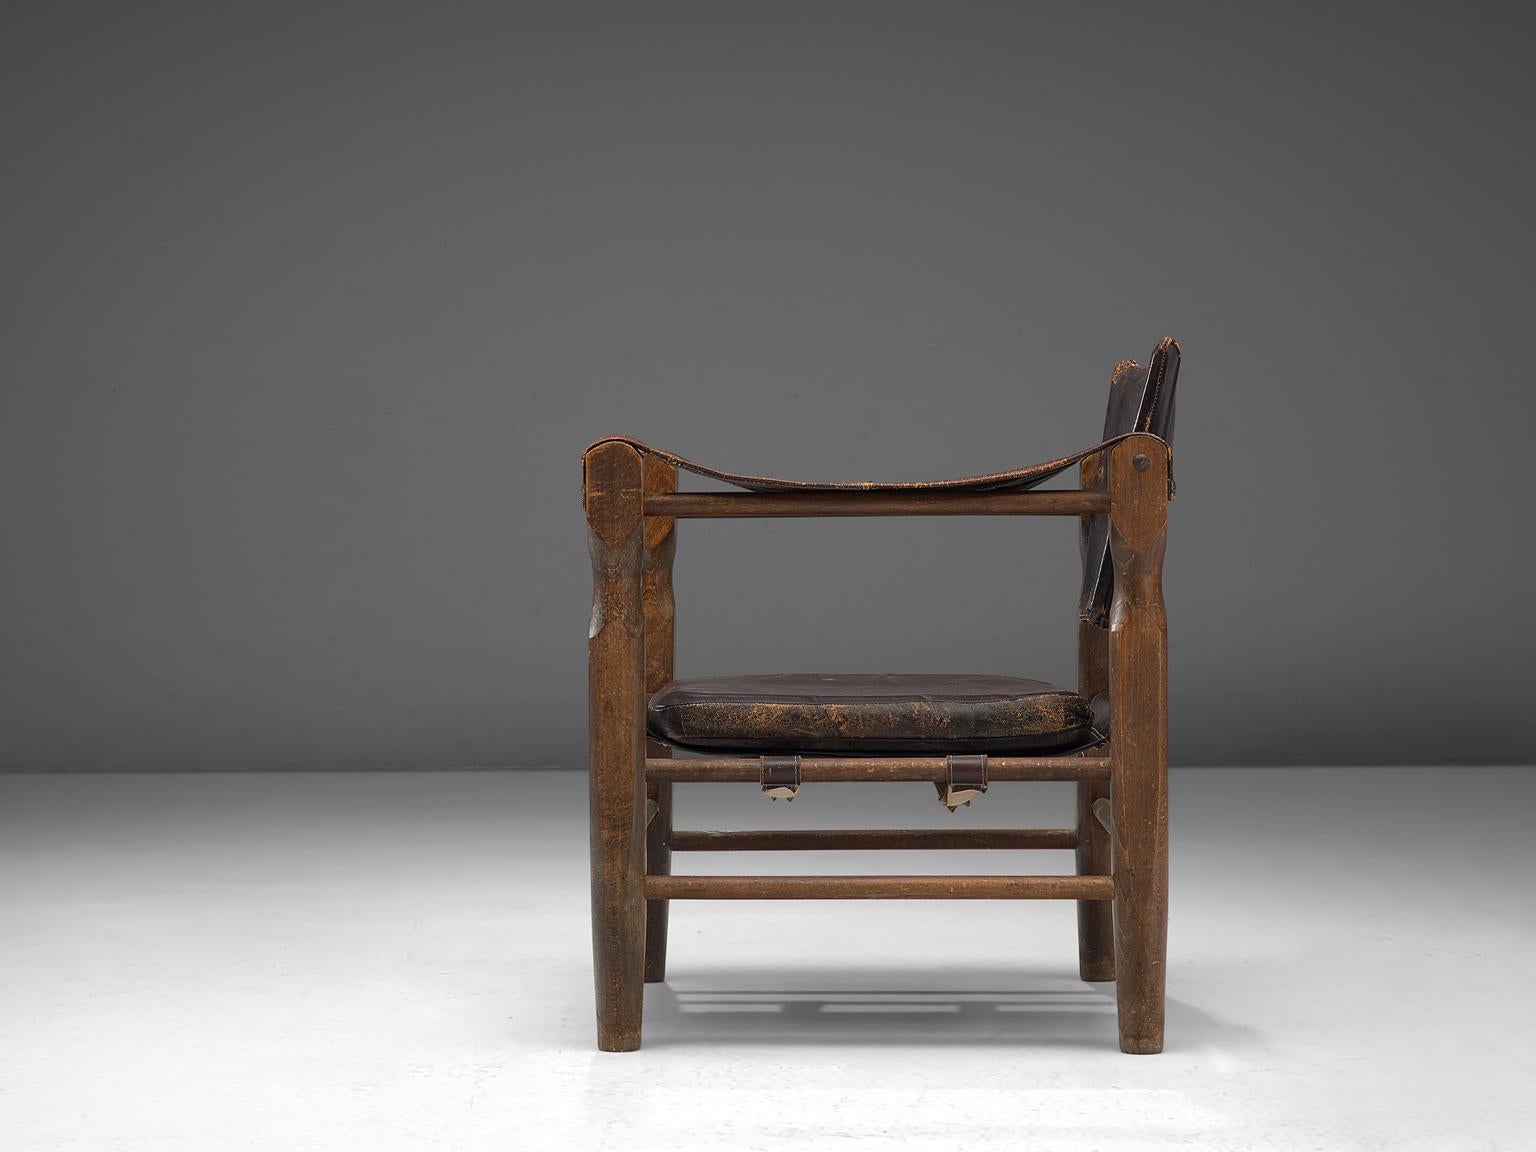 European Safari Chair in Patinated Brown Leather and Oak, 1940s